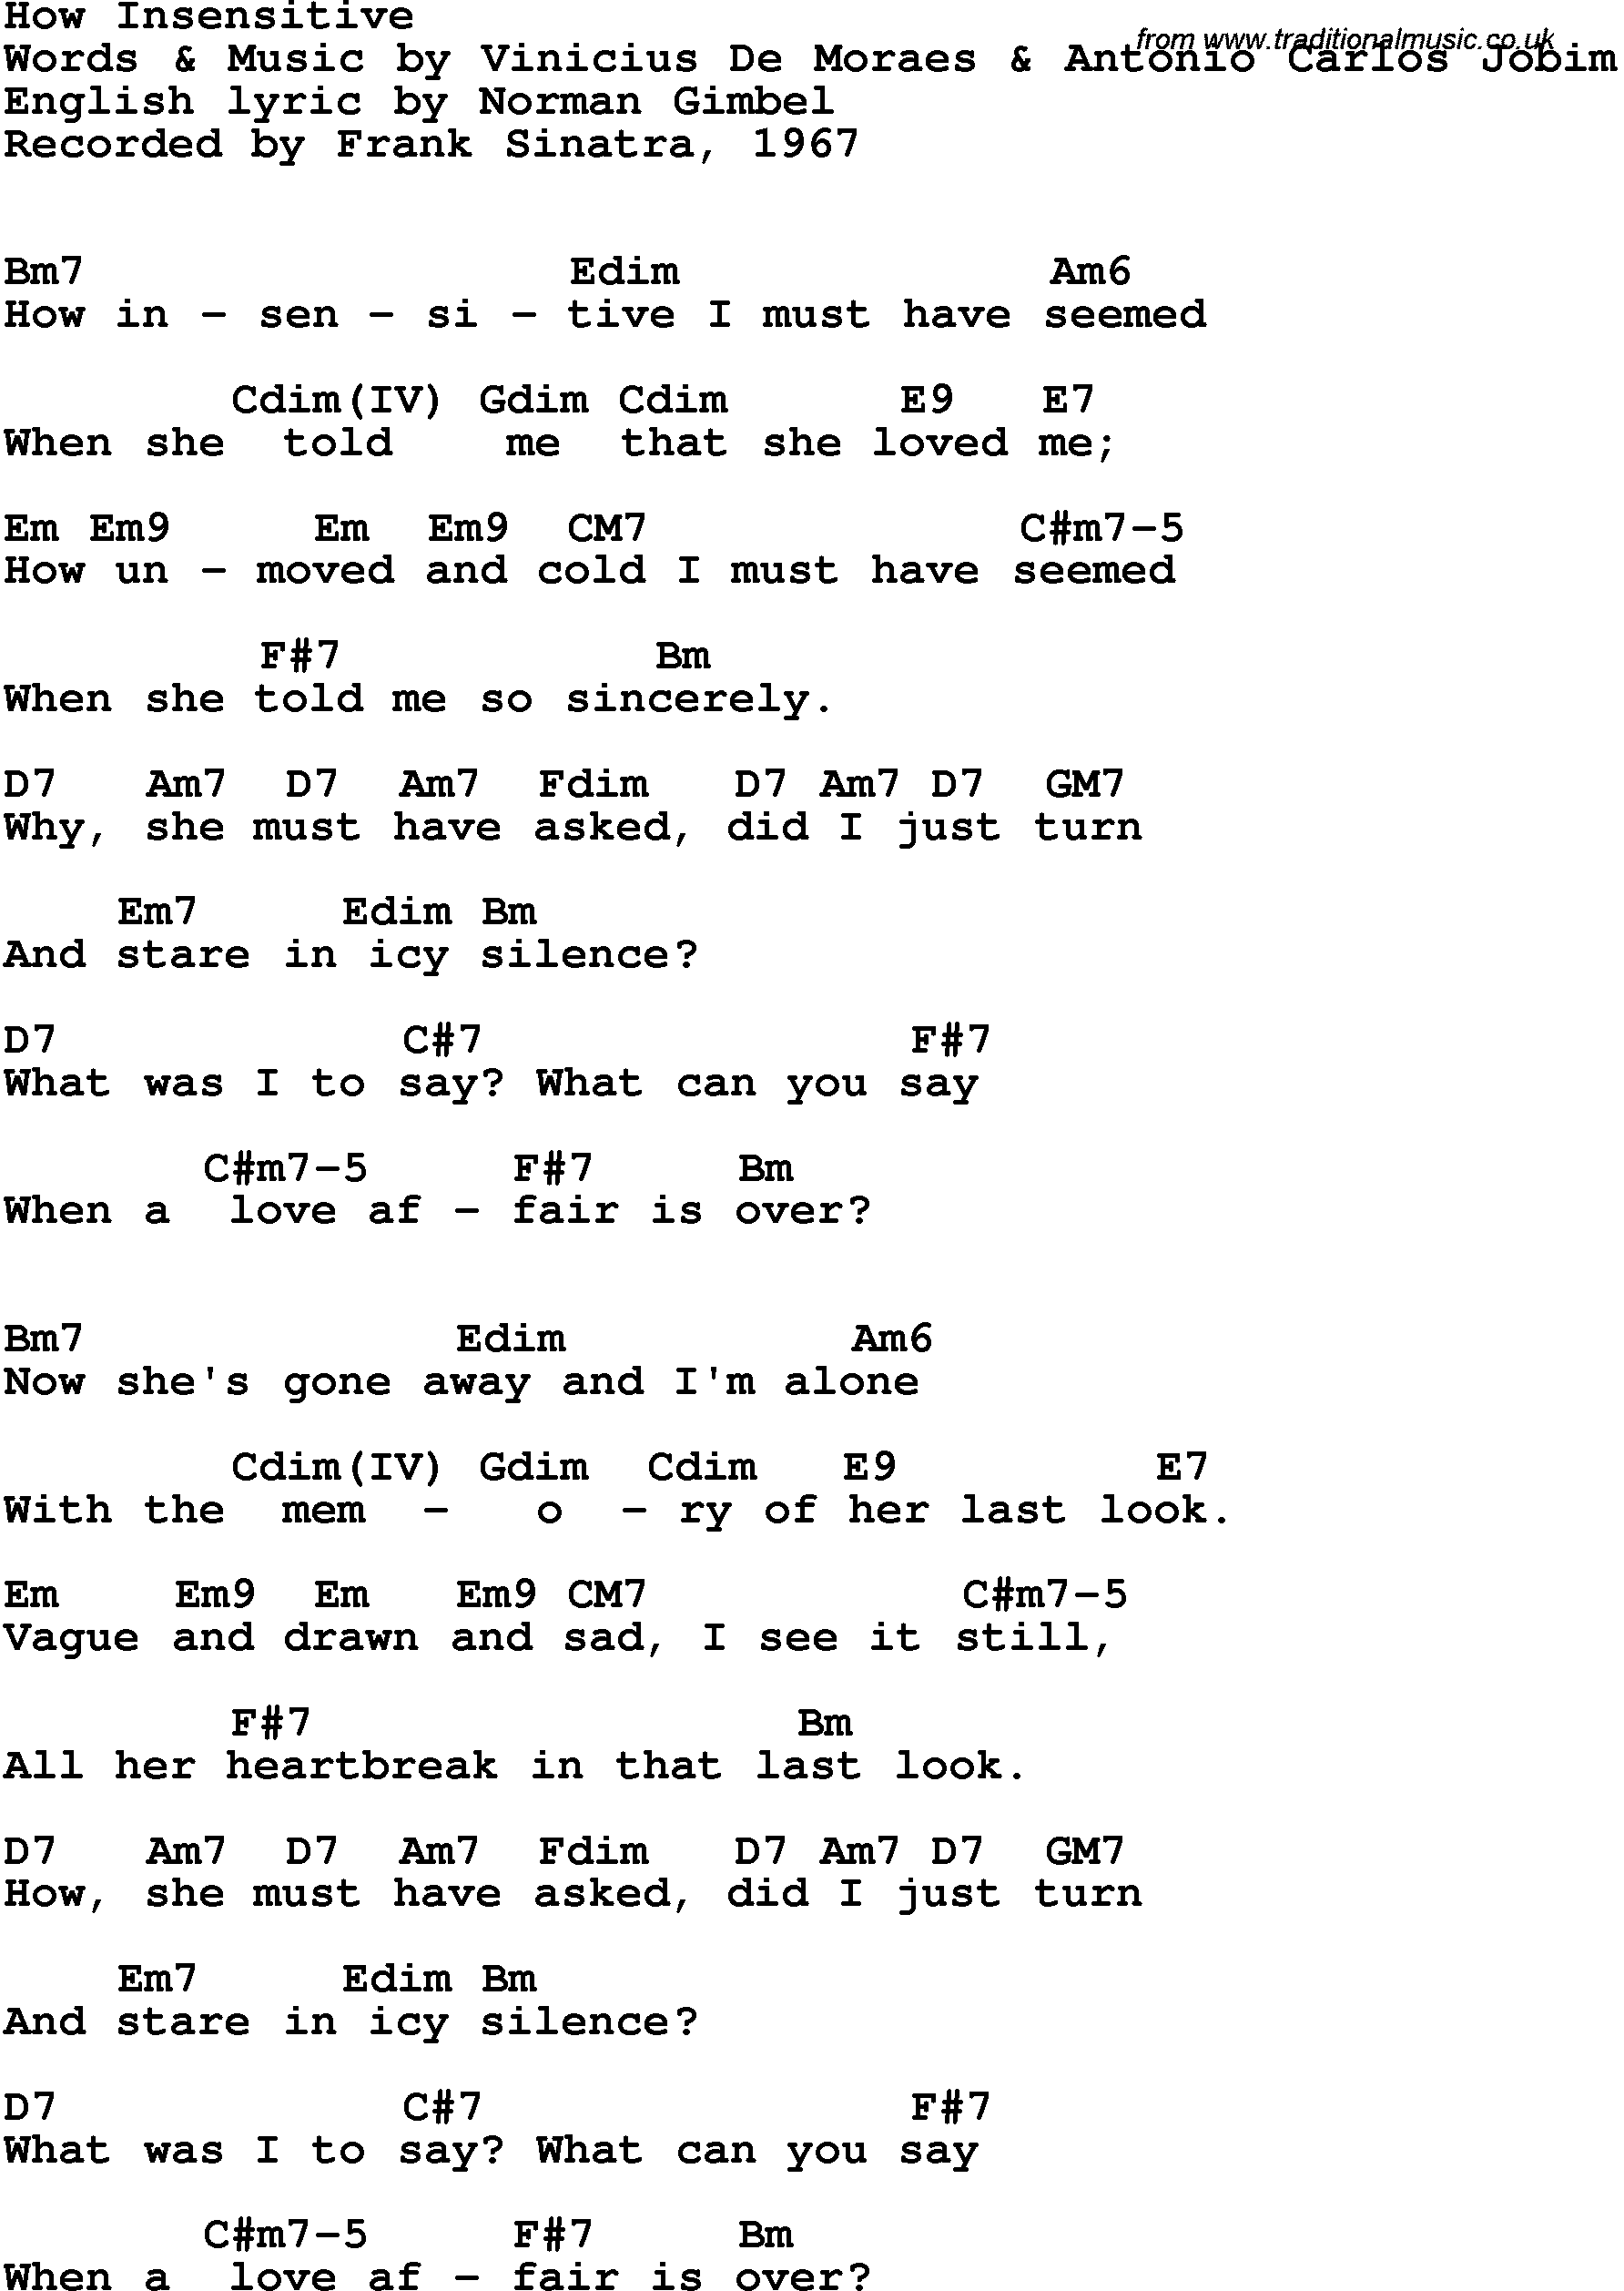 Song Lyrics with guitar chords for How Insensitive - Frank Sinatra, 1967